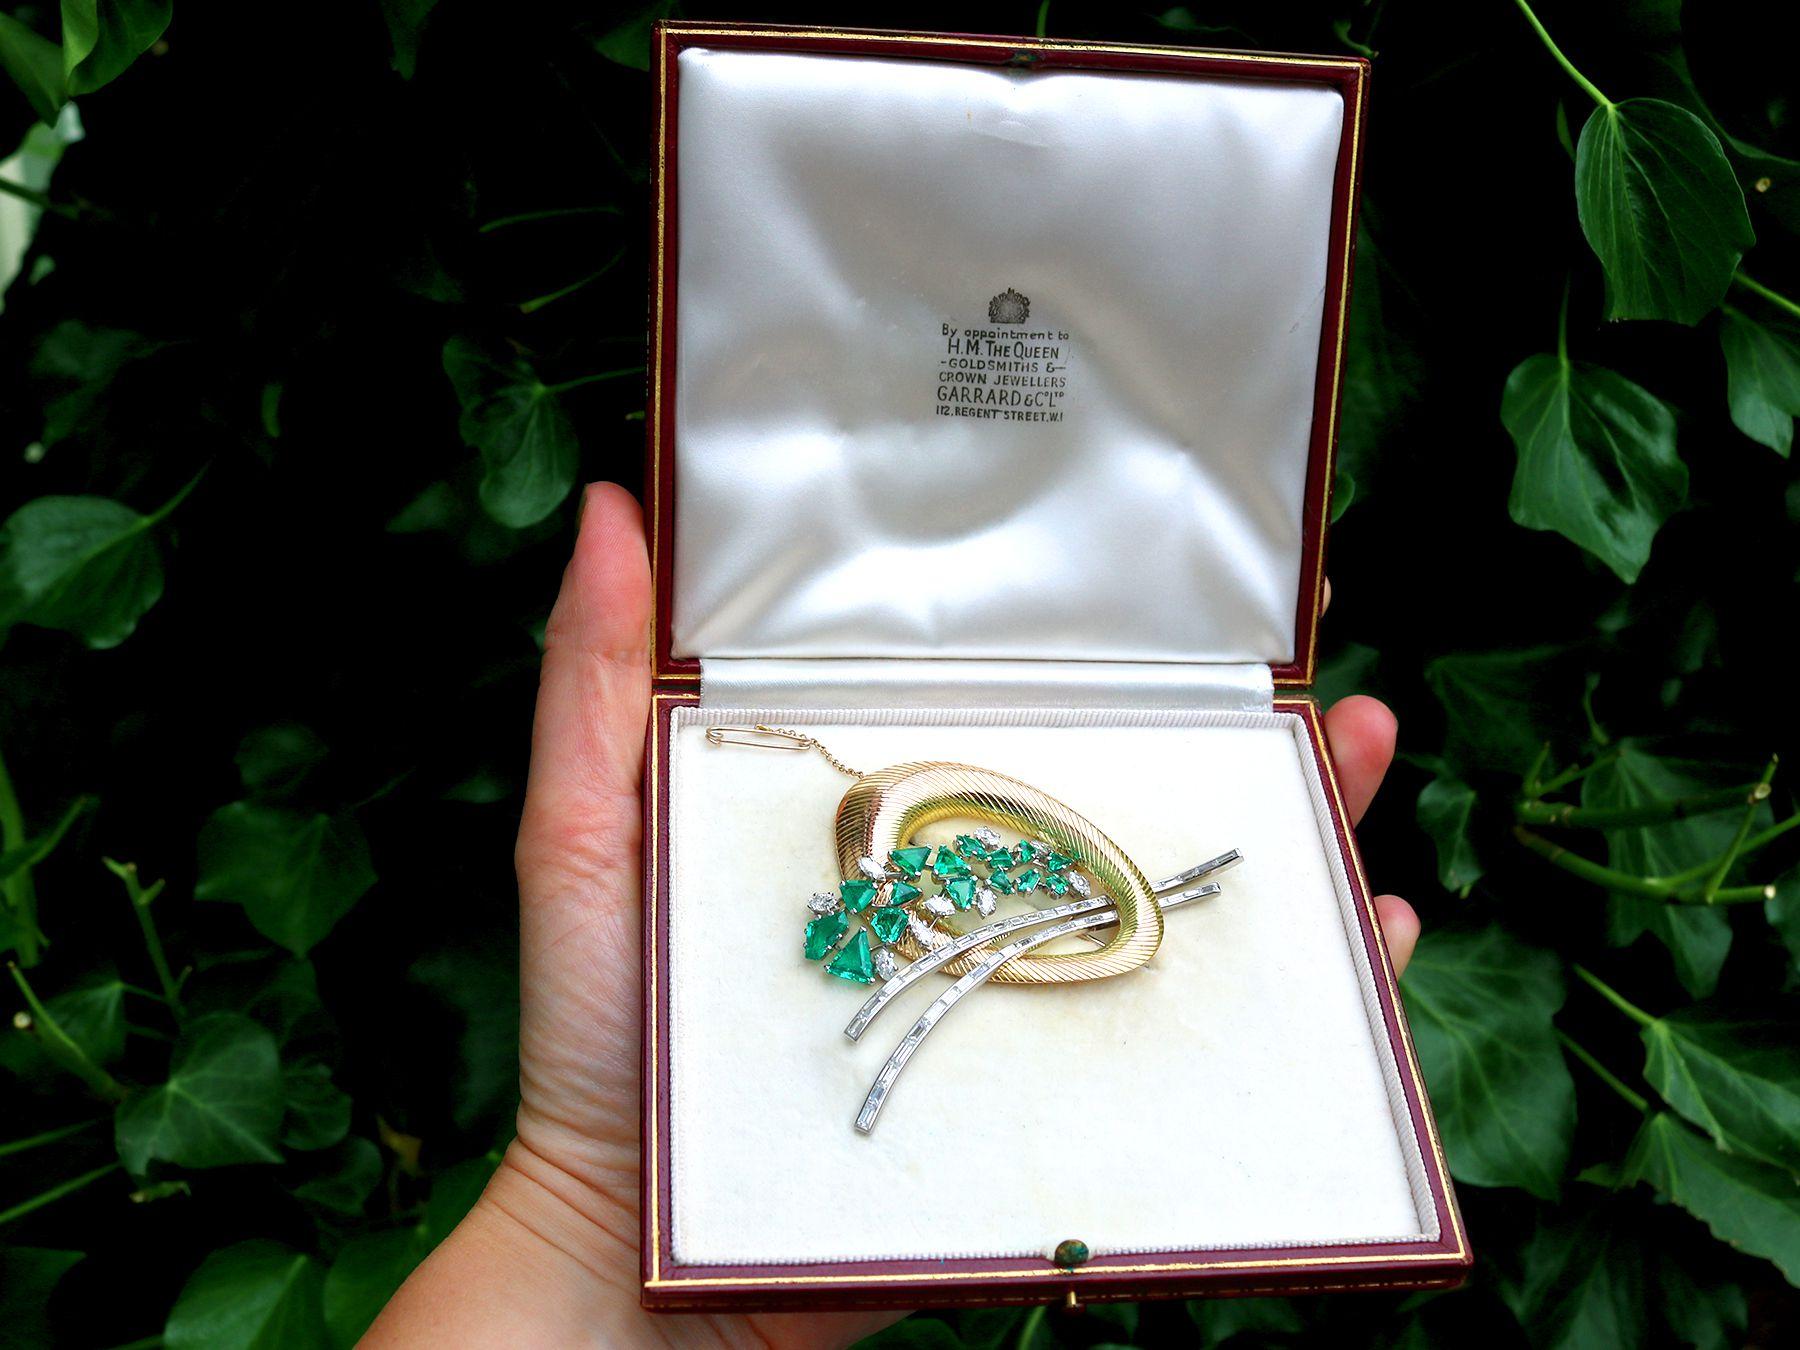 A stunning, fine and impressive, large antique 4.05 carat diamond and 6.07 carat emerald, 18 karat yellow gold and platinum Art Deco style brooch made by Garrards & Co Ltd; part of our diverse antique boxed jewelry and estate jewelry